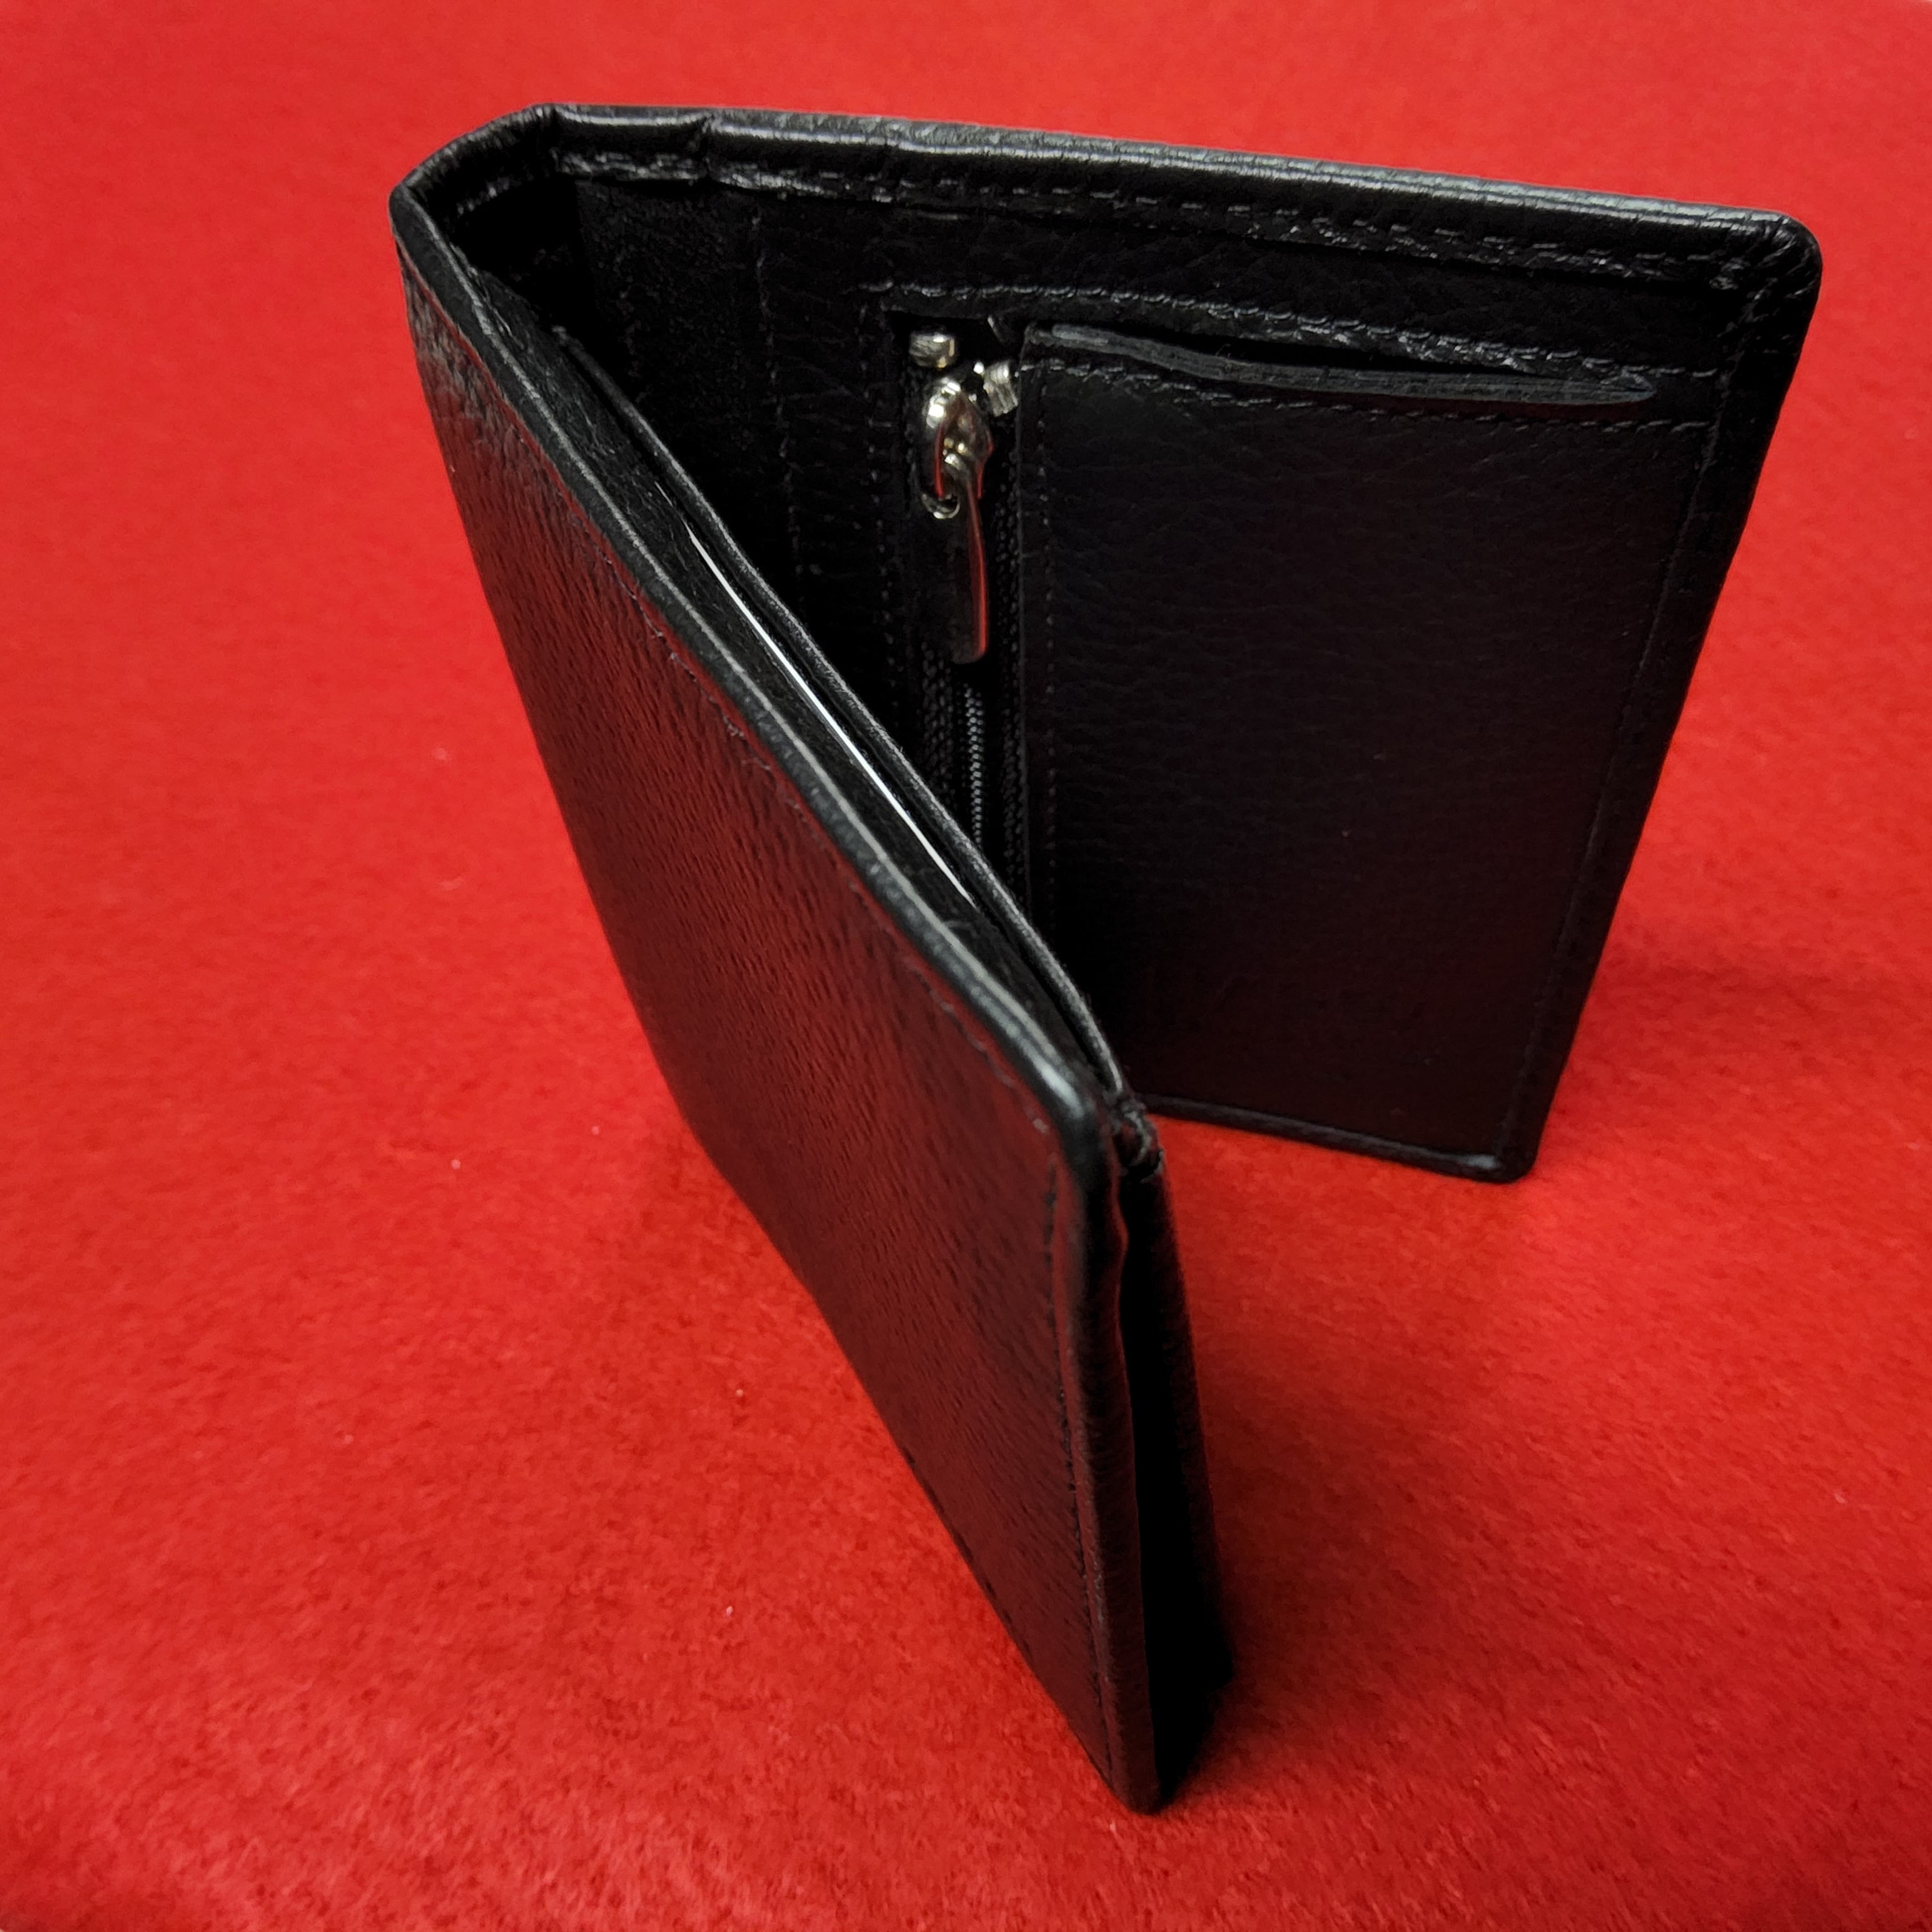 NAPPA Leather Wallet - RFID Identity Block  - Change Purse with Zipper Closure - Colour options